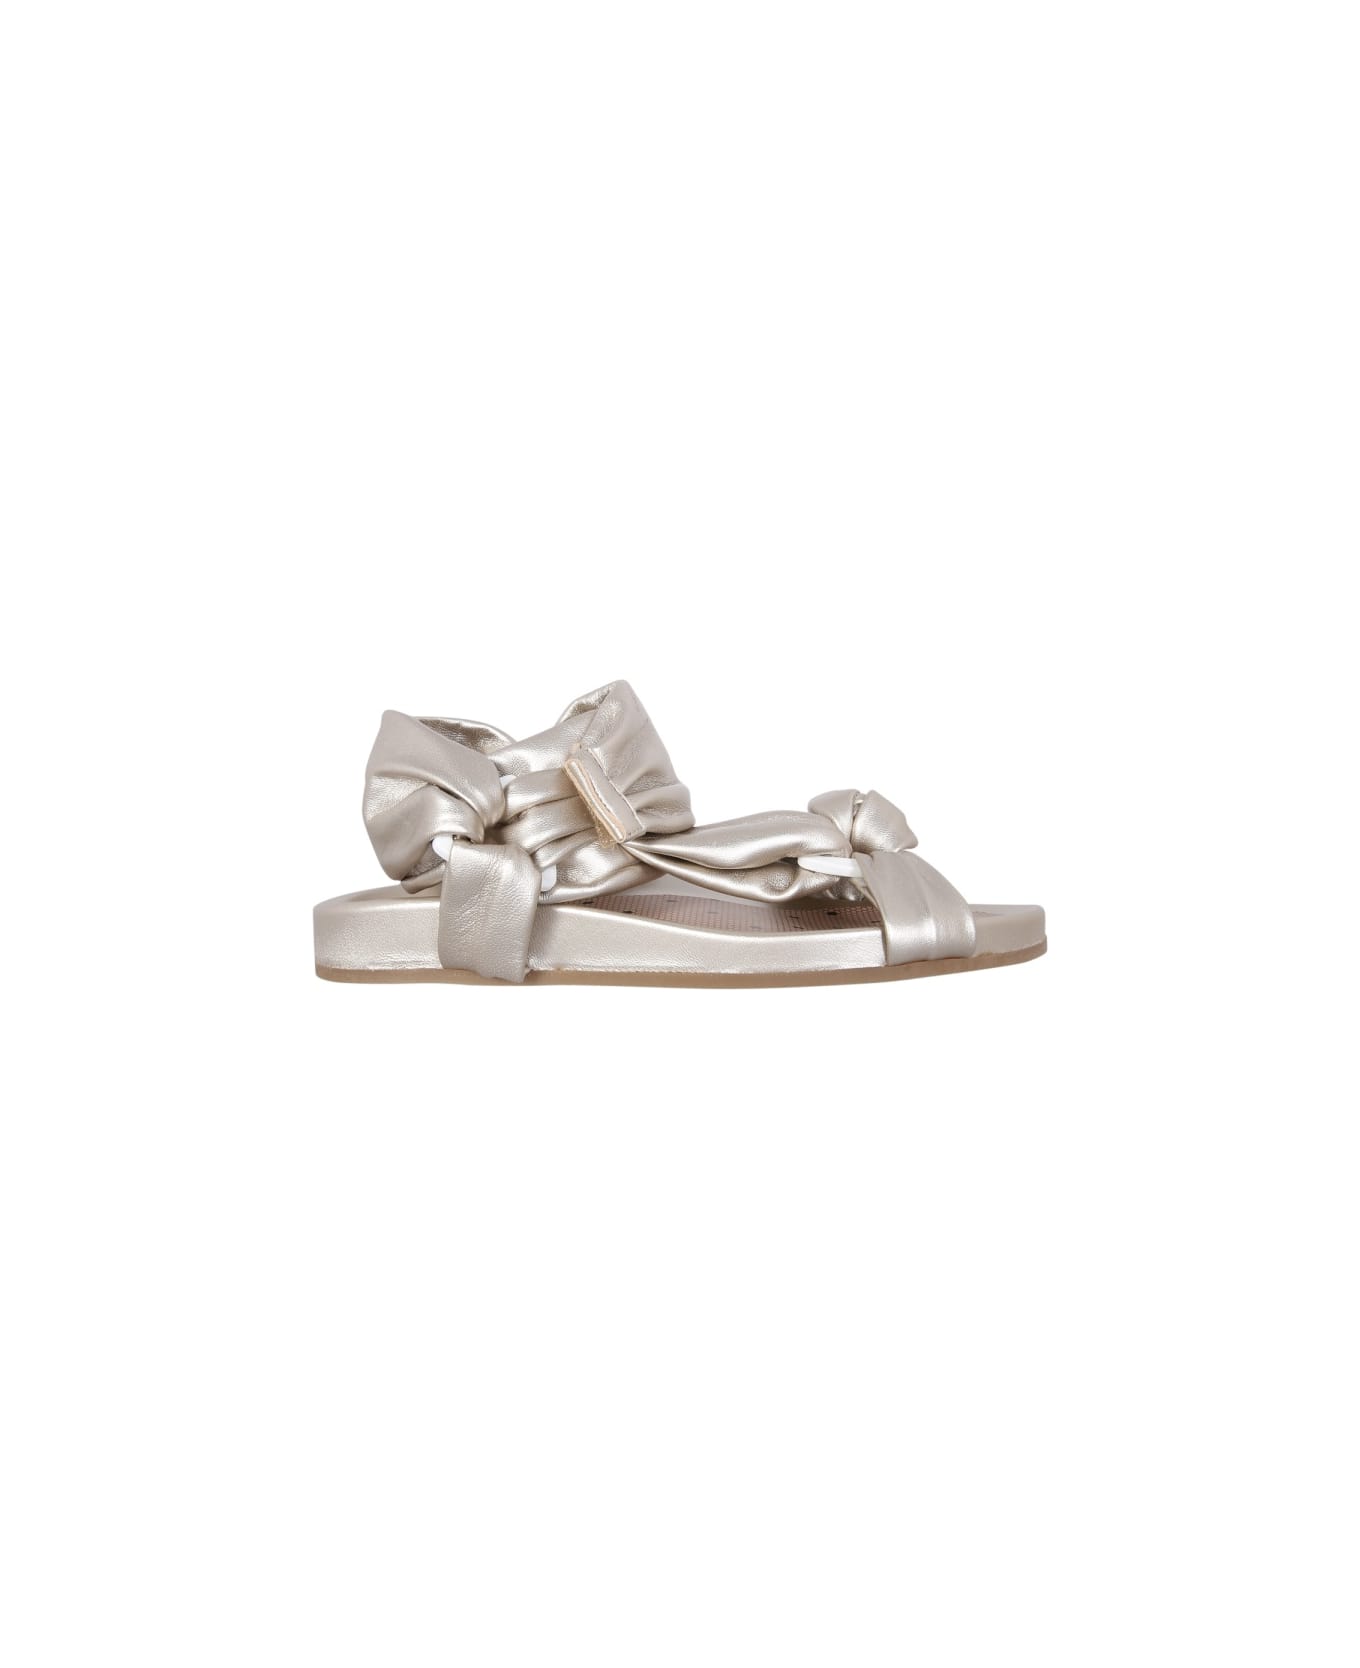 RED Valentino Puffy Strap Sandals - SILVER